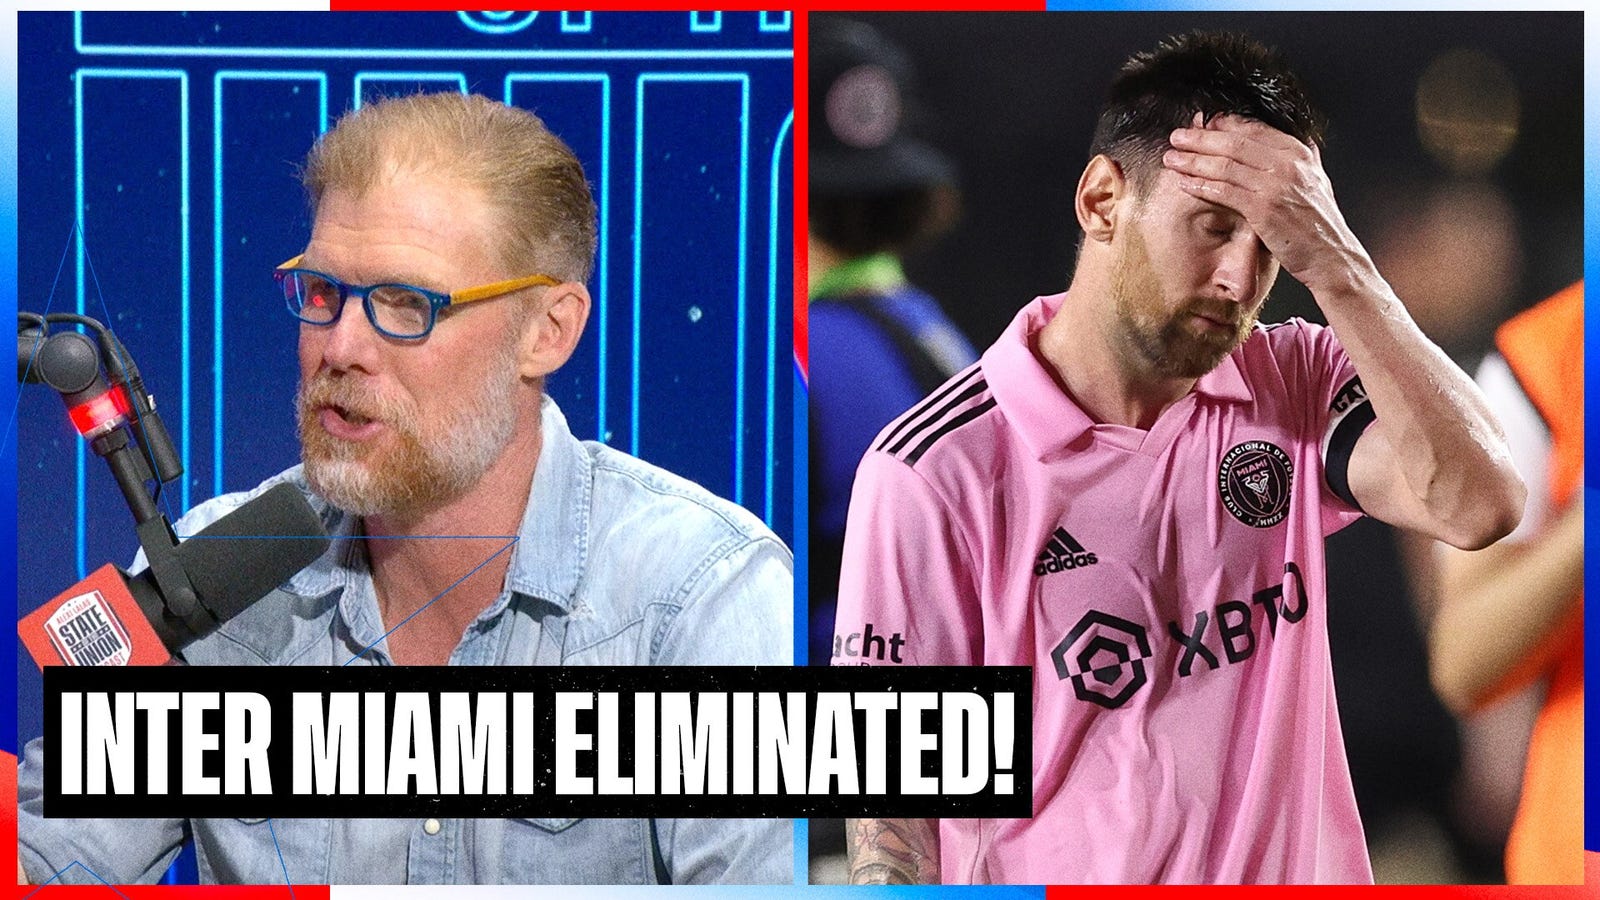 Inter Miami and Messi miss the playoffs & is Messi playing for Argentina?